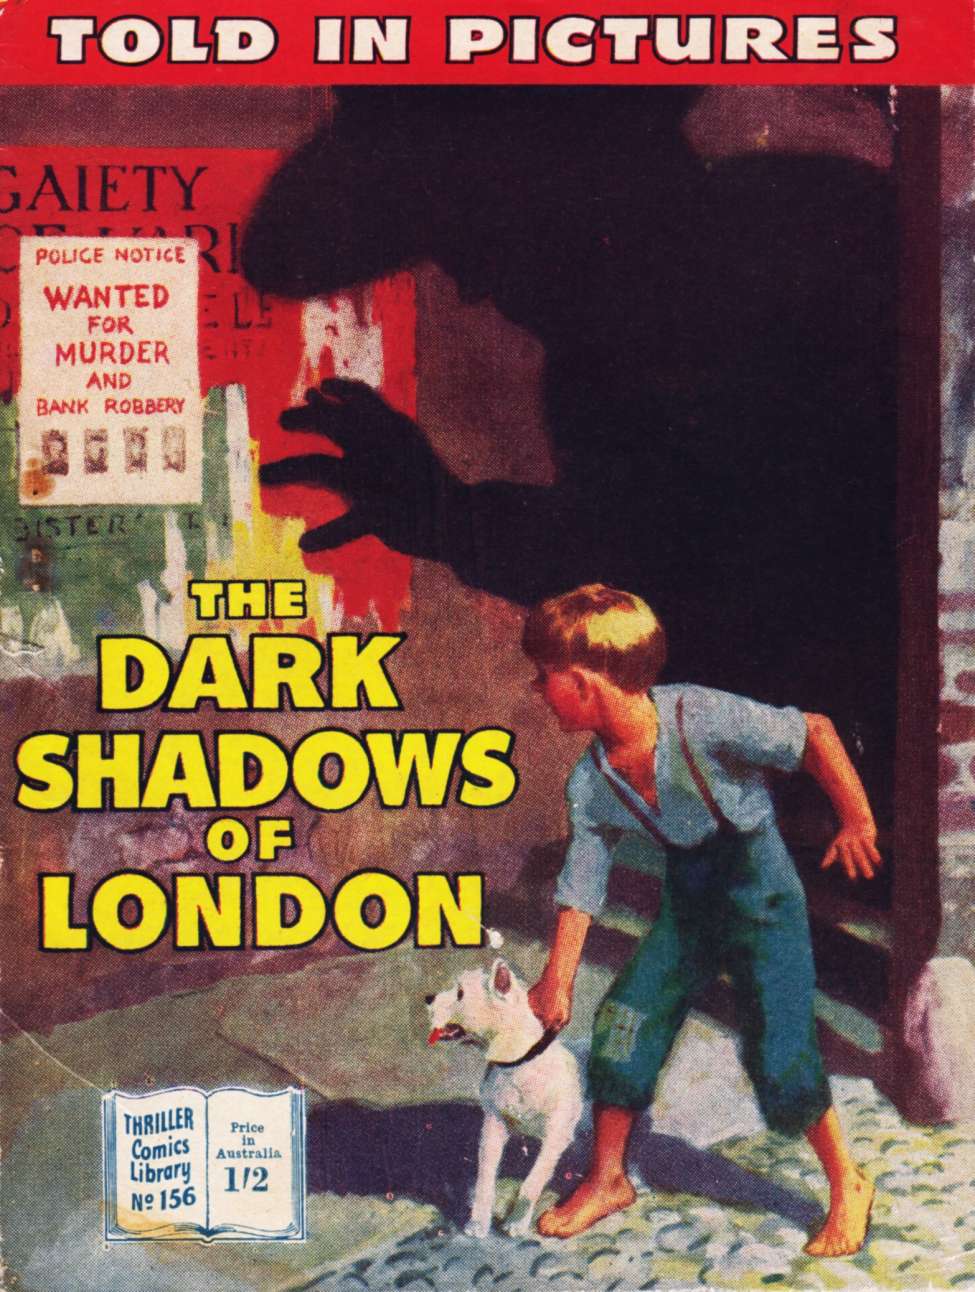 Book Cover For Thriller Comics Library 156 - The Dark Shadows of London